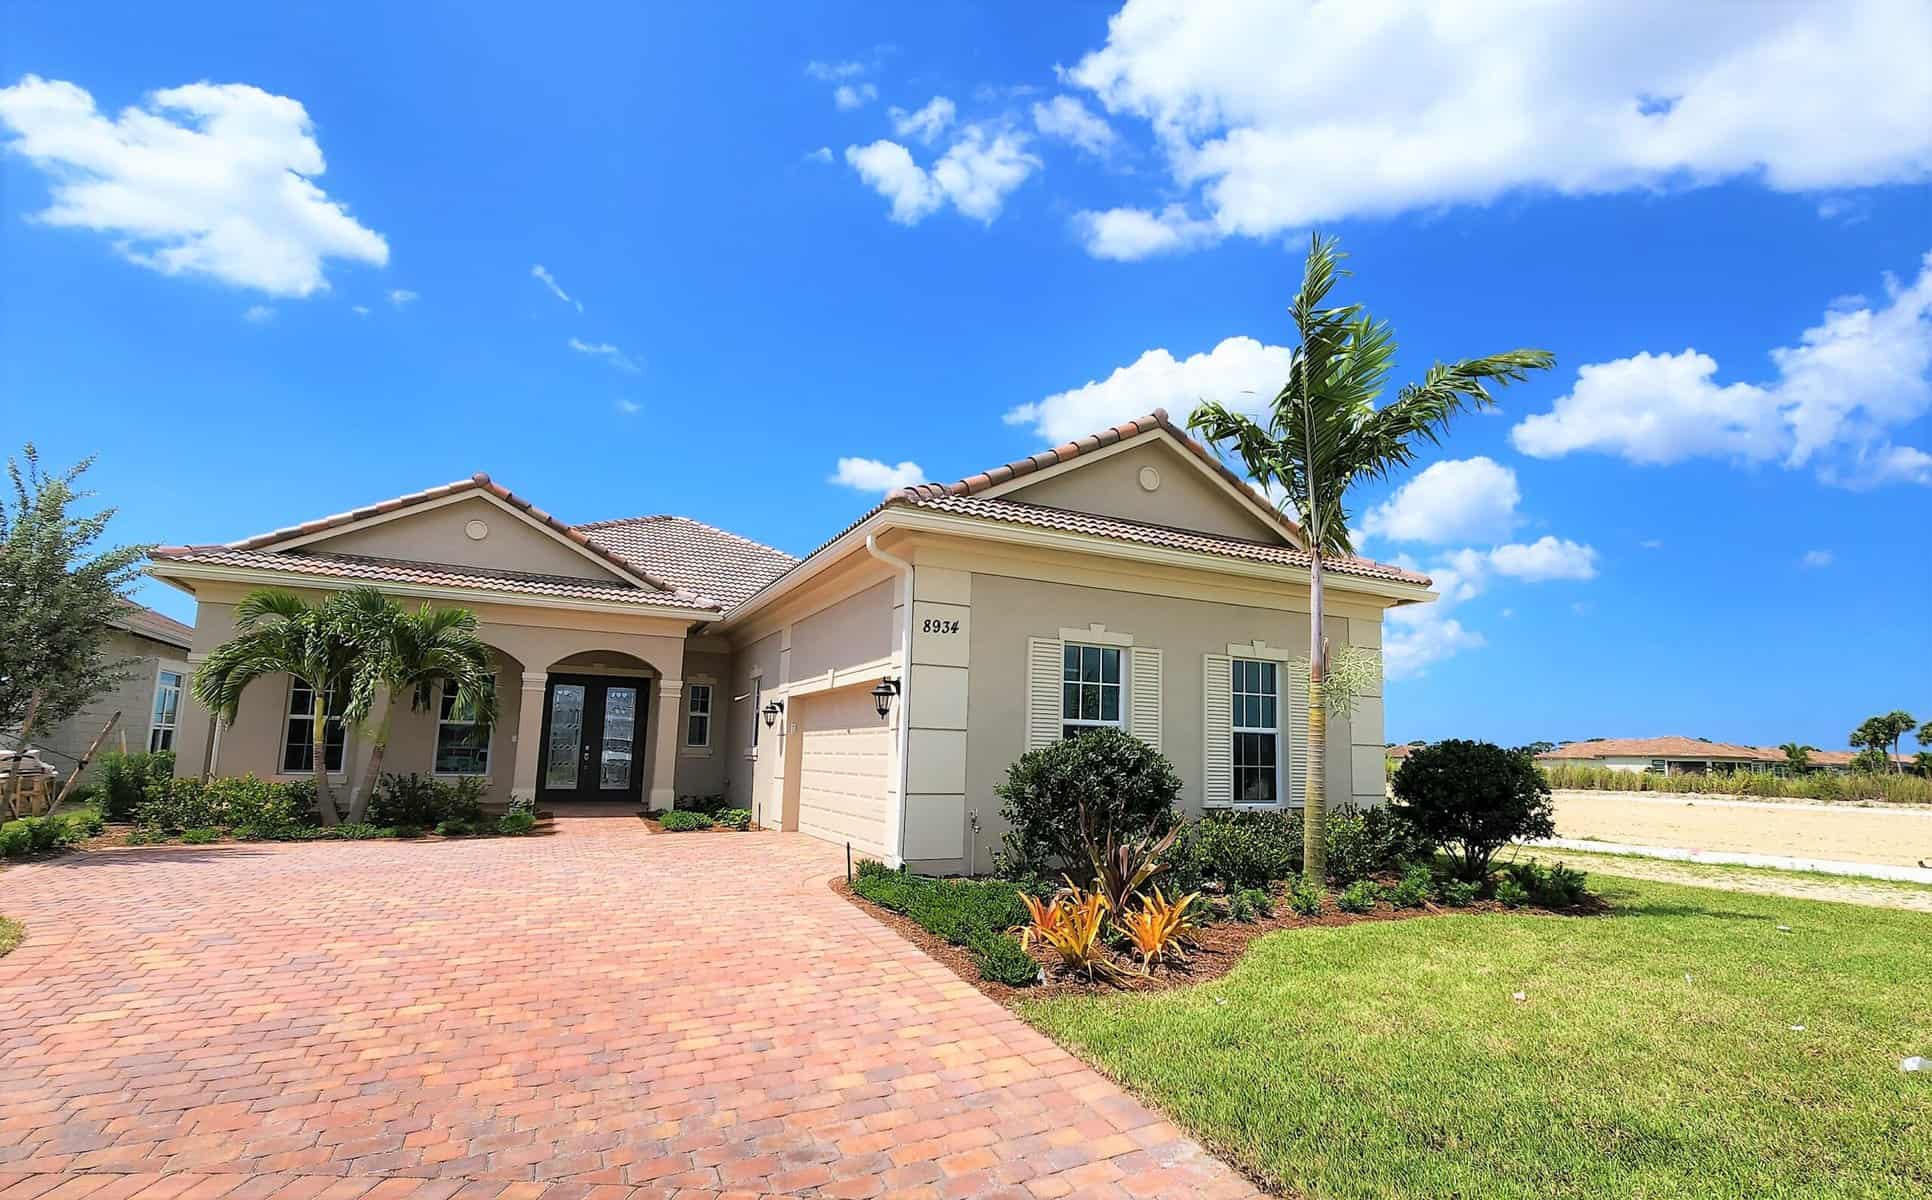 Pentalago Palm City Homes For Sale